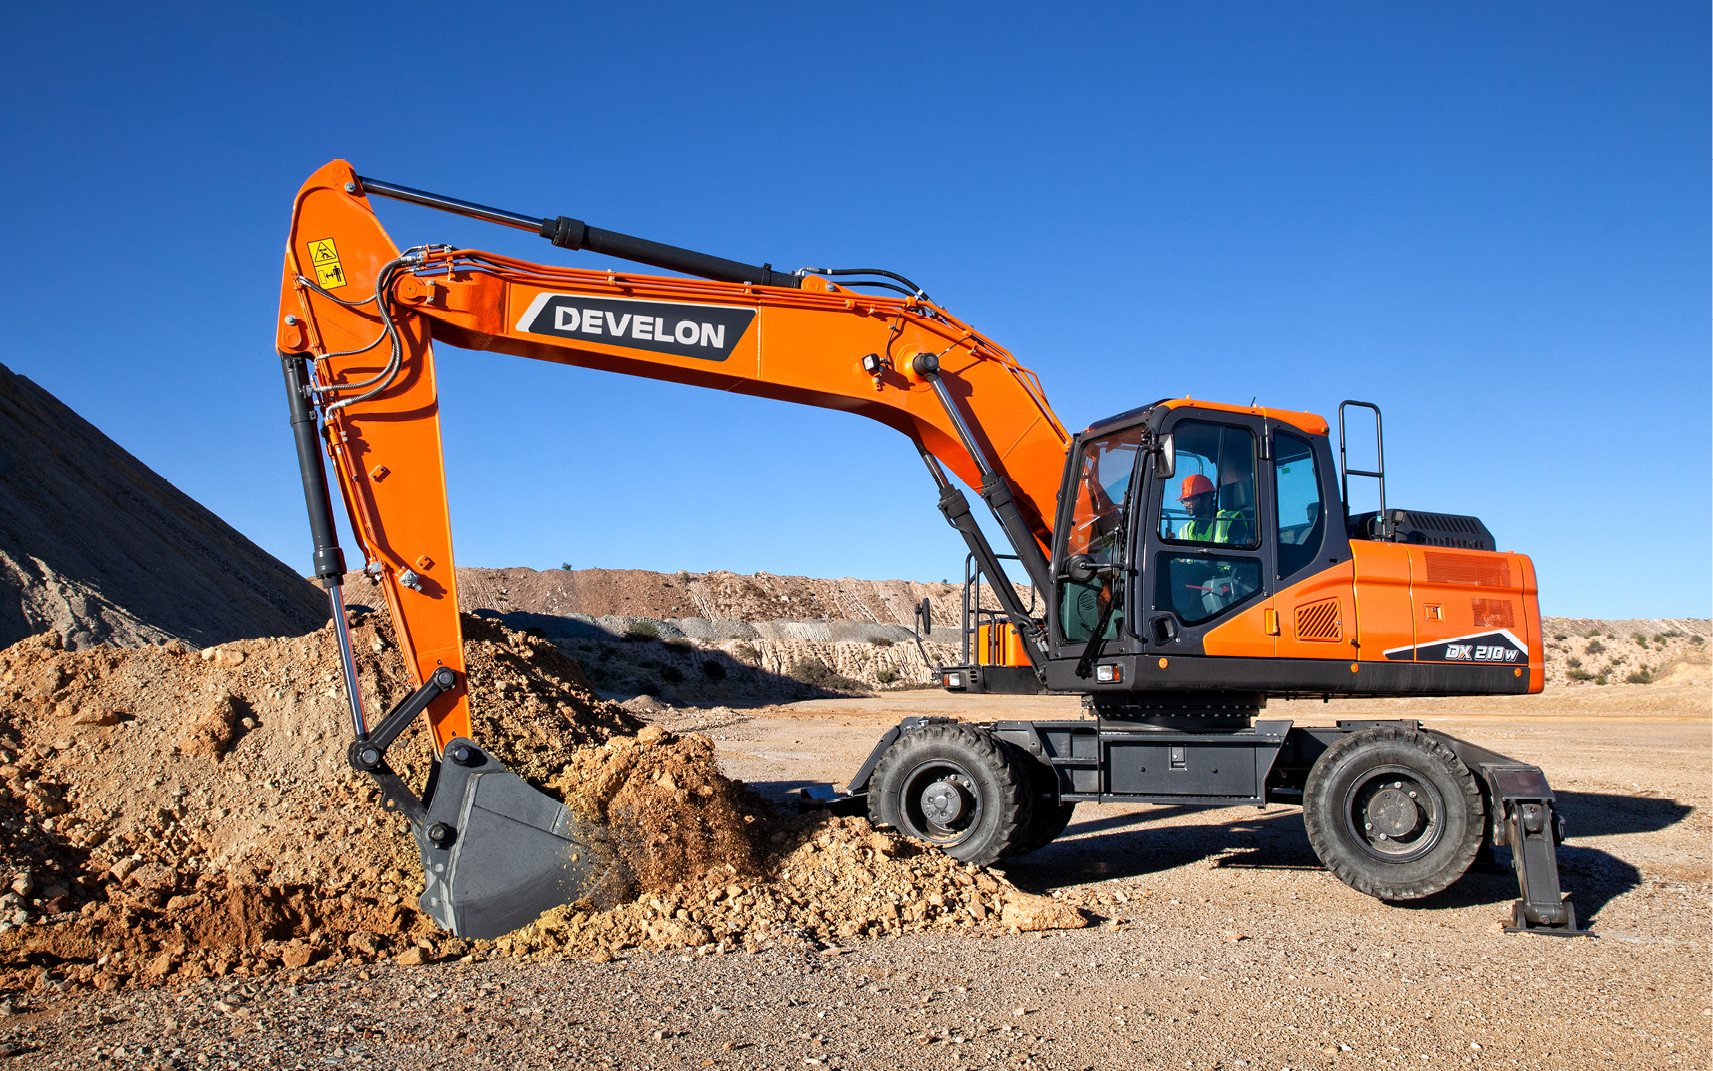 Doosan -7 series wheel excavator bucket digs into the ground, while the outriggers stabilize the machine.